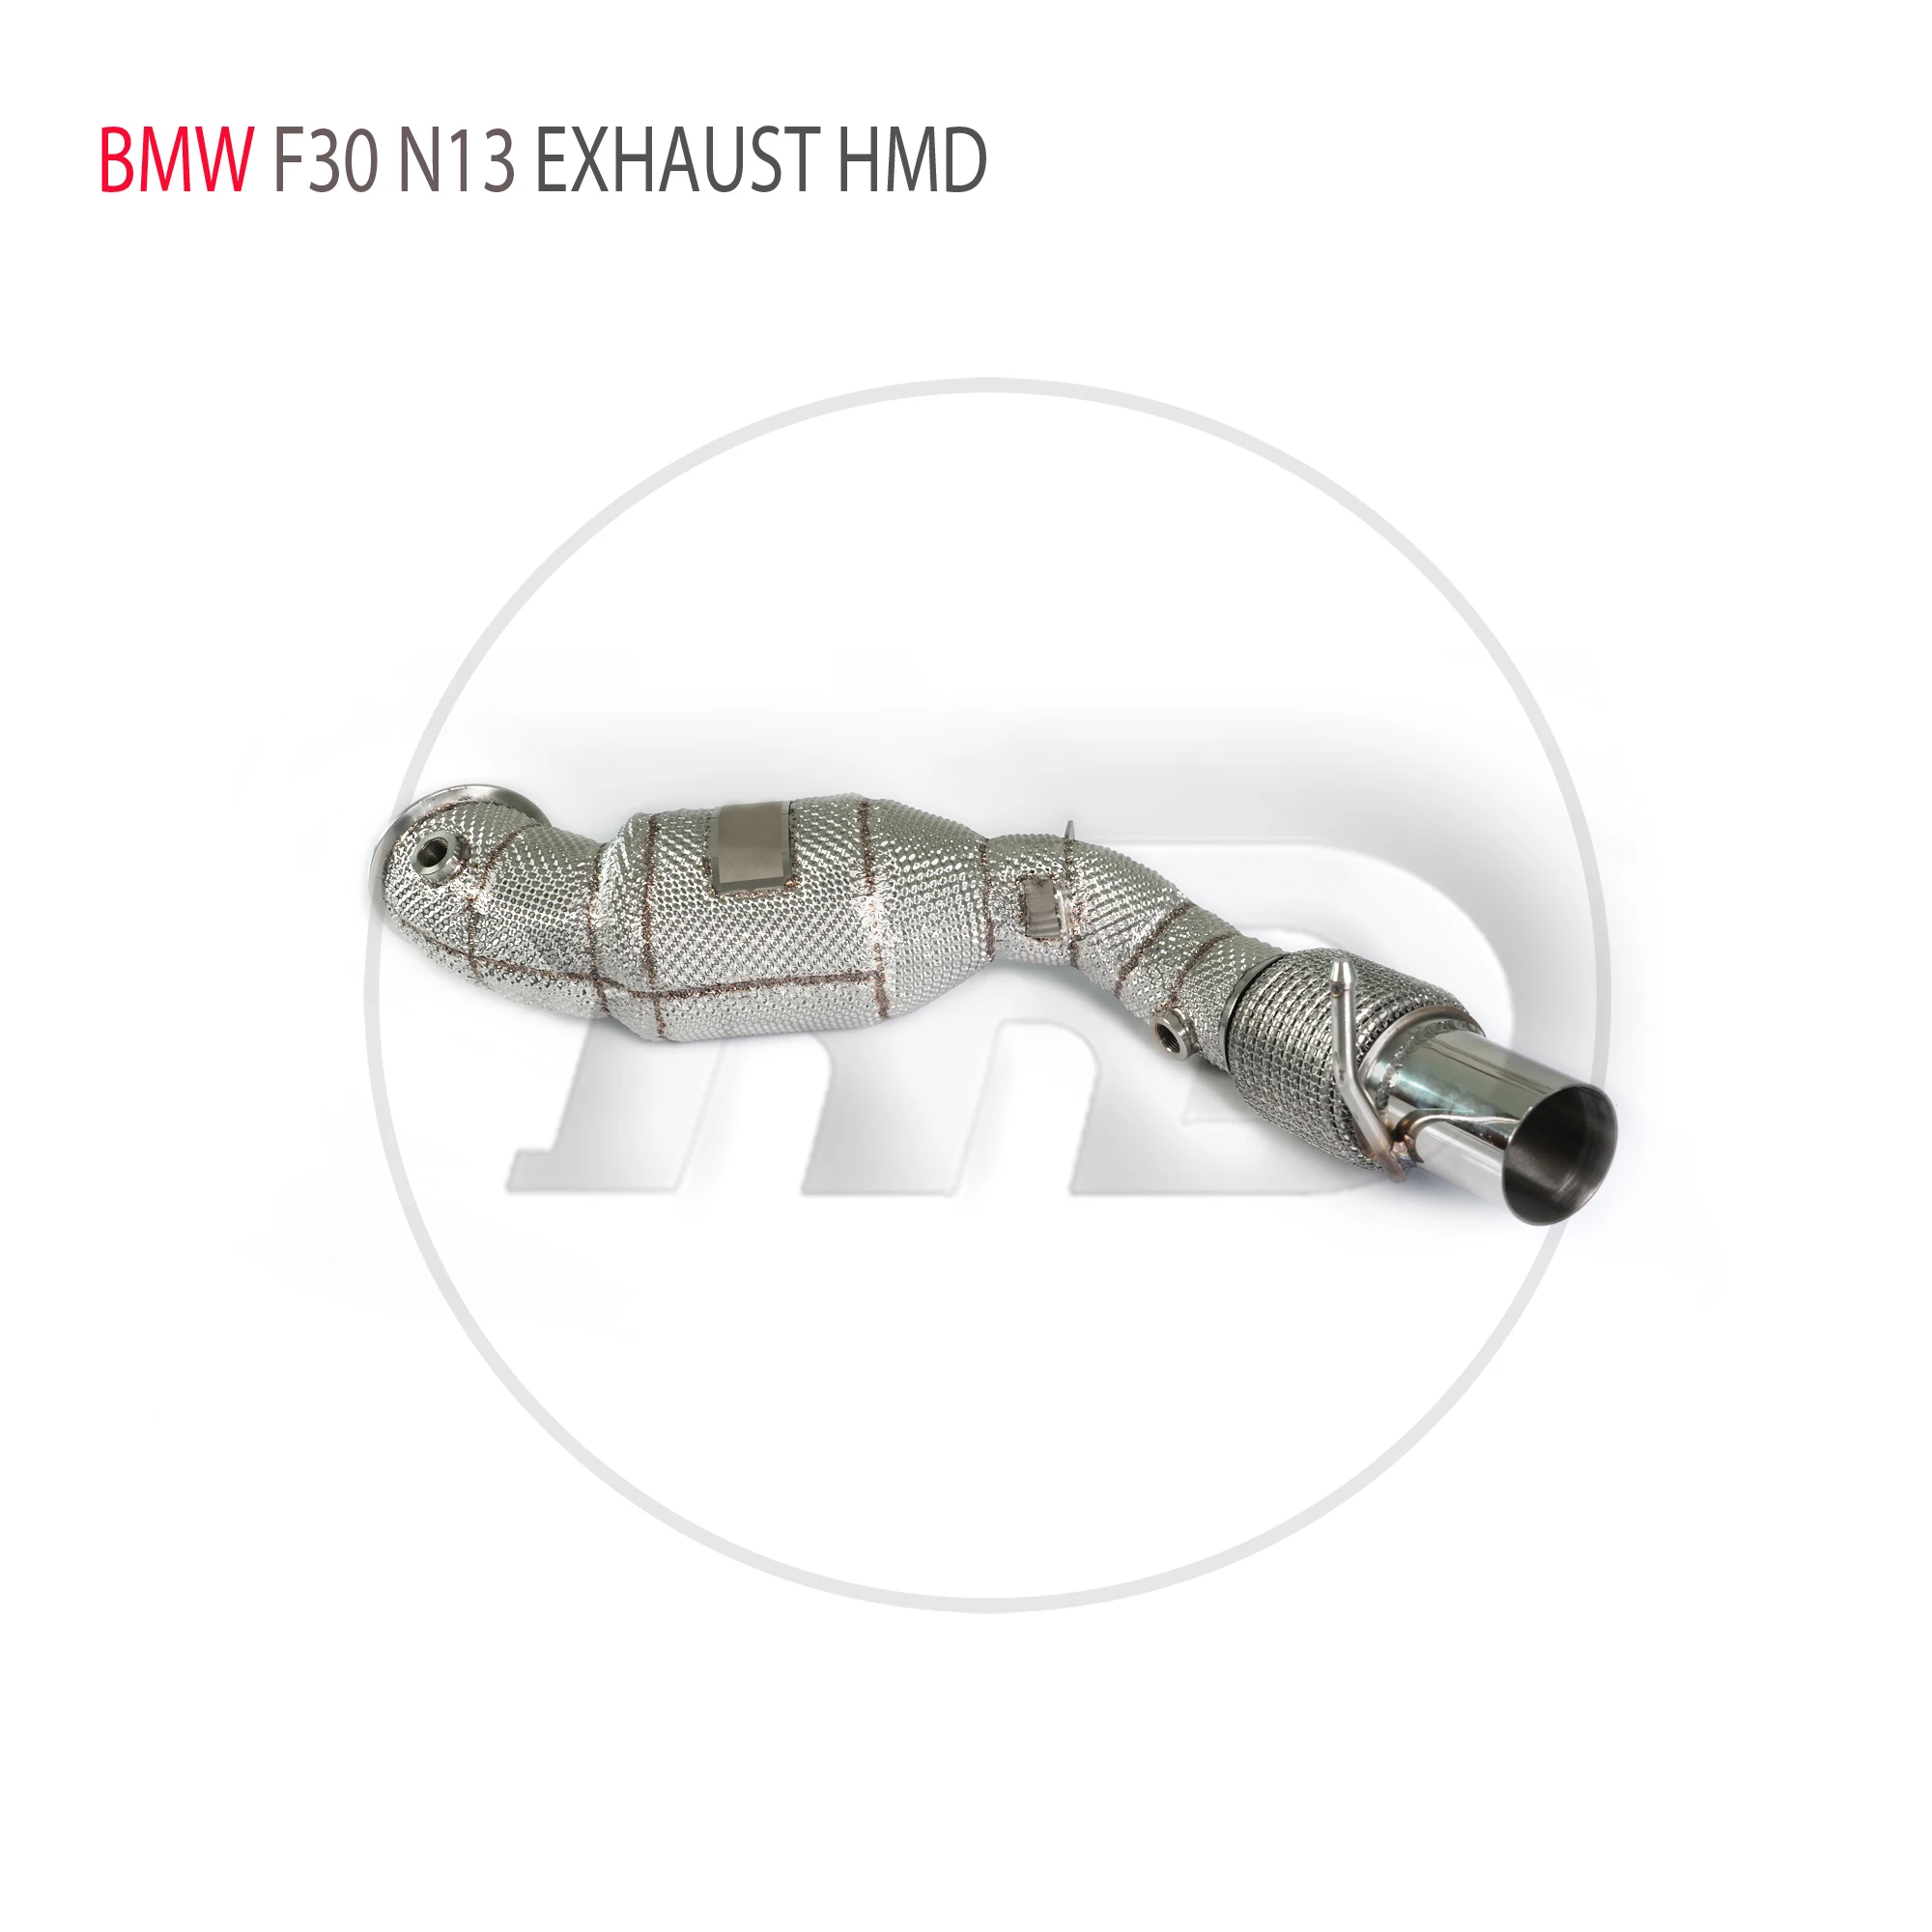 

HMD Exhaust System High Flow Performance Downpipe for BMW 316i F30 N13 Engine With Catalytic Converter Racing Pipe